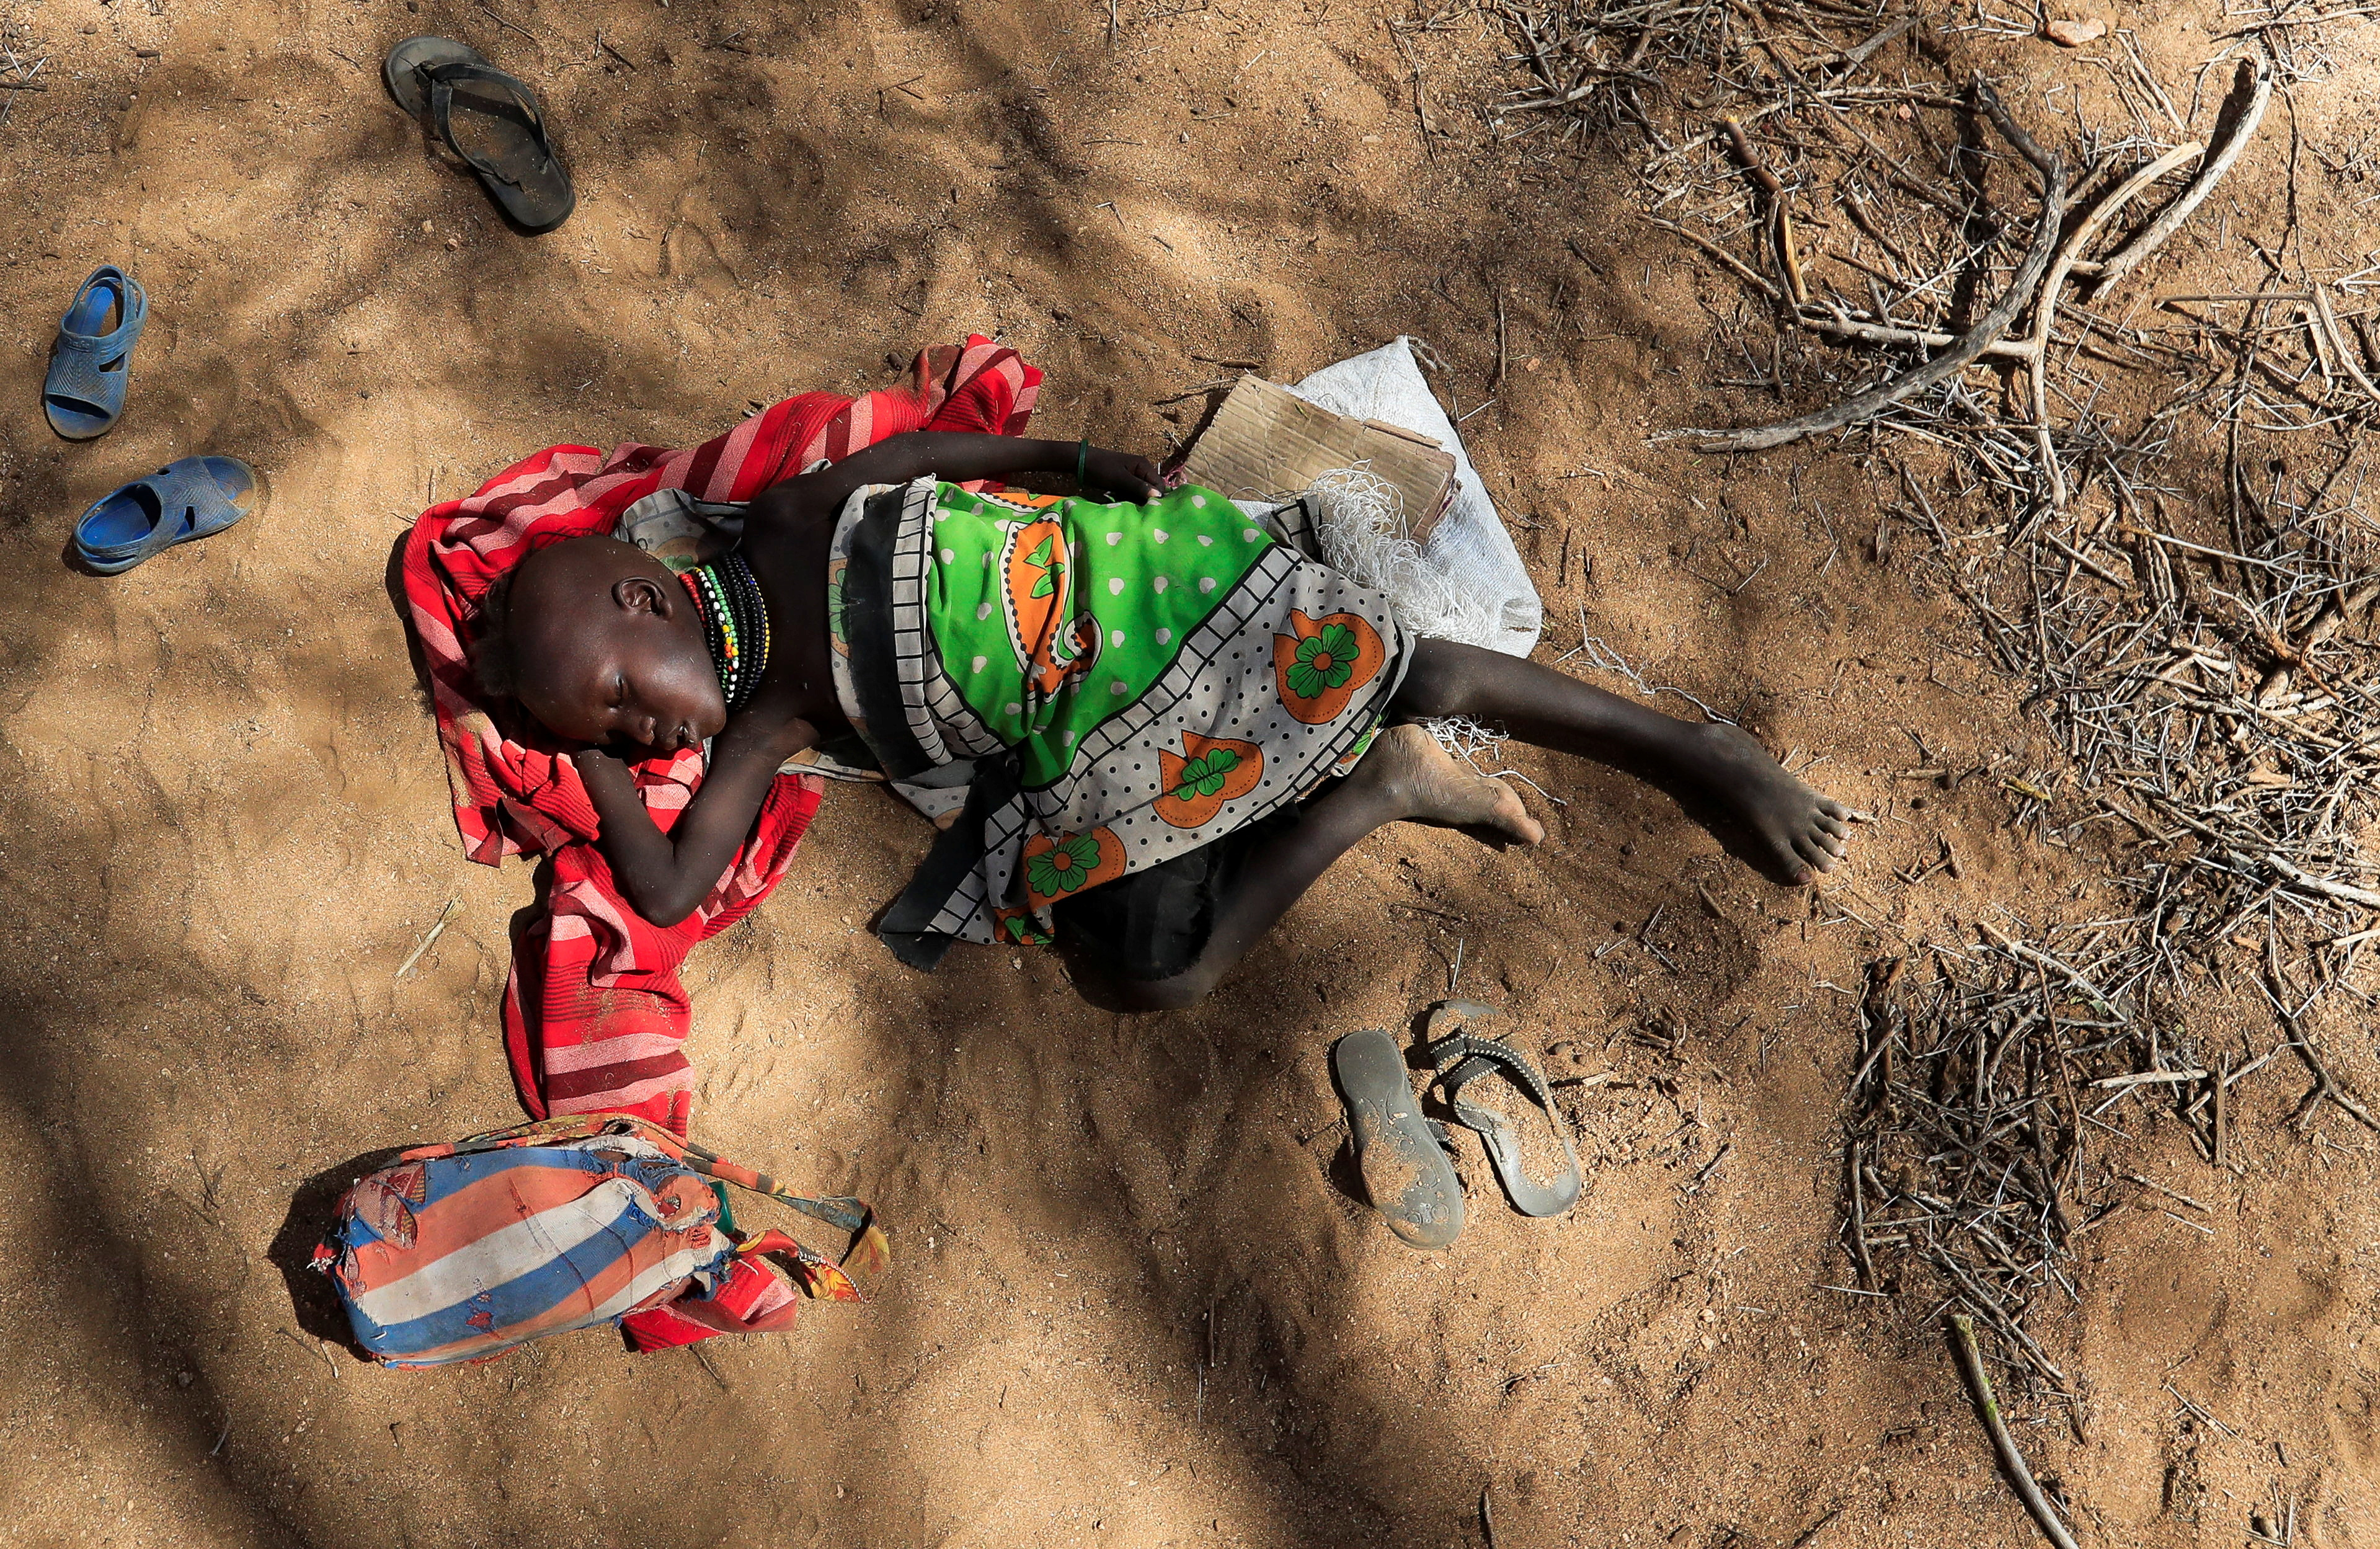 A child from the Turkana pastoralist community affected by the worsening drought due to failed rain seasons, sleeps under a tree as people attend an integrated outreach medical clinic in Kakimat village in Turkana